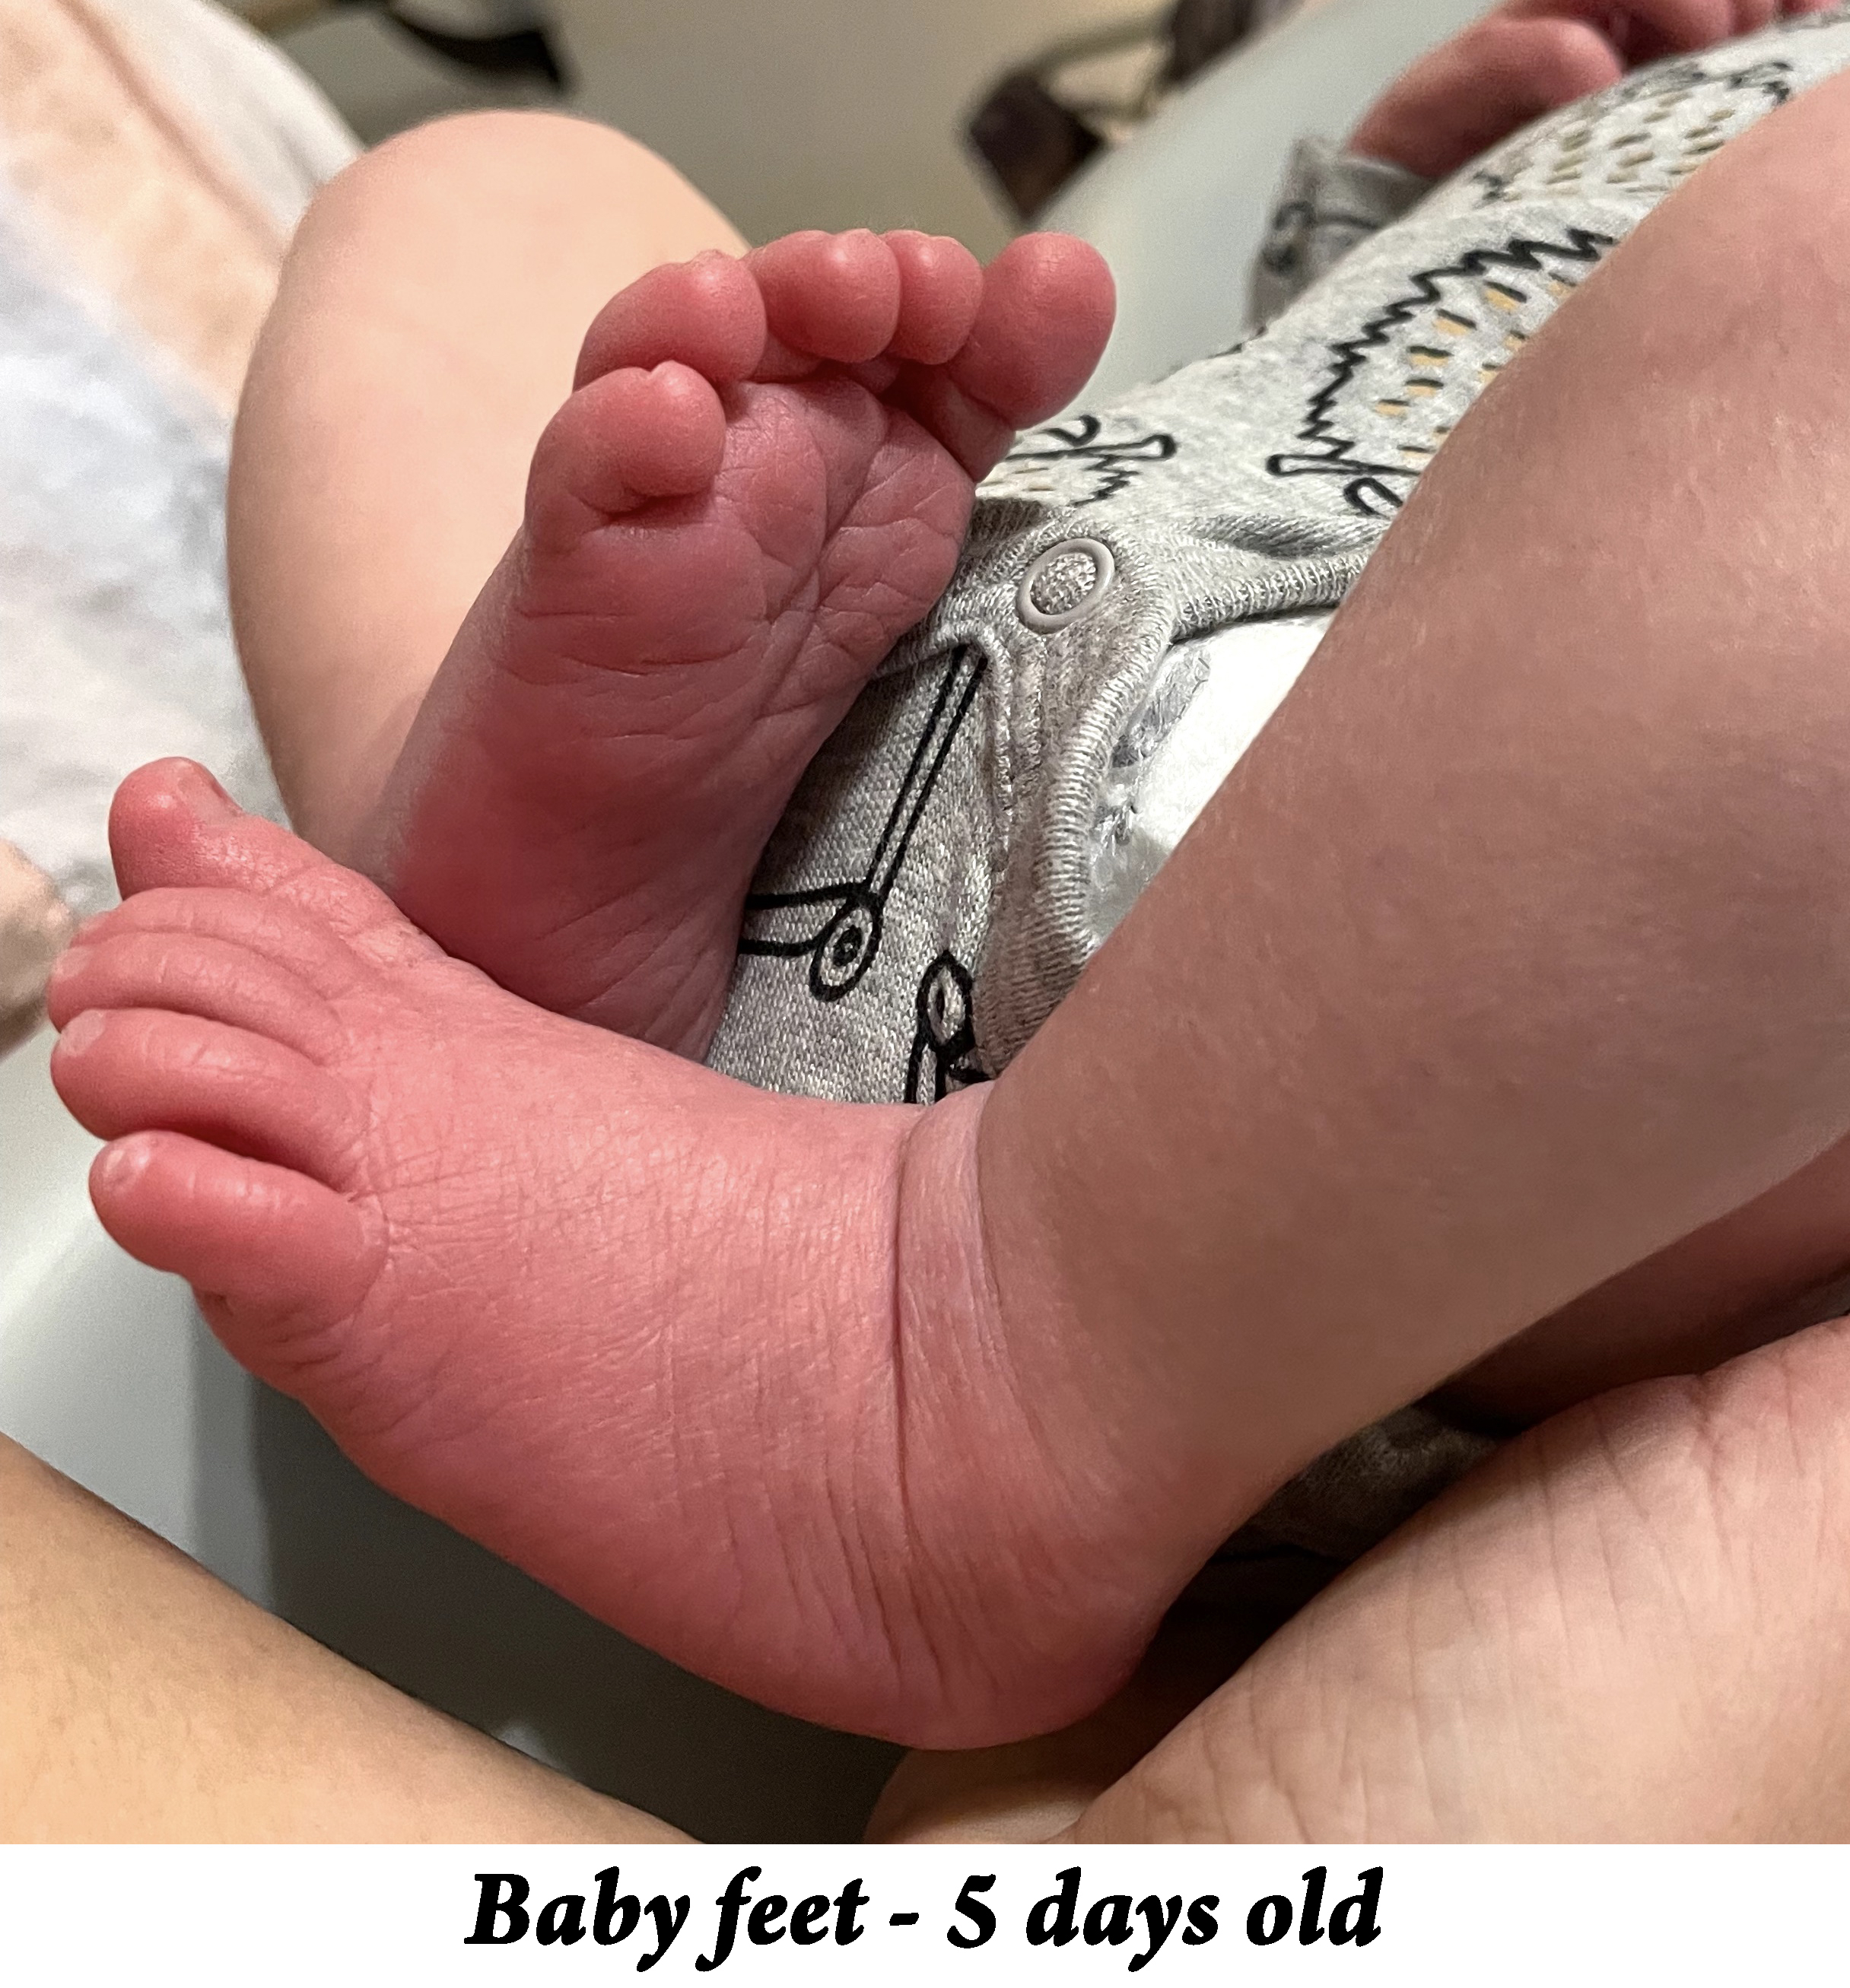 Two baby feet are seen